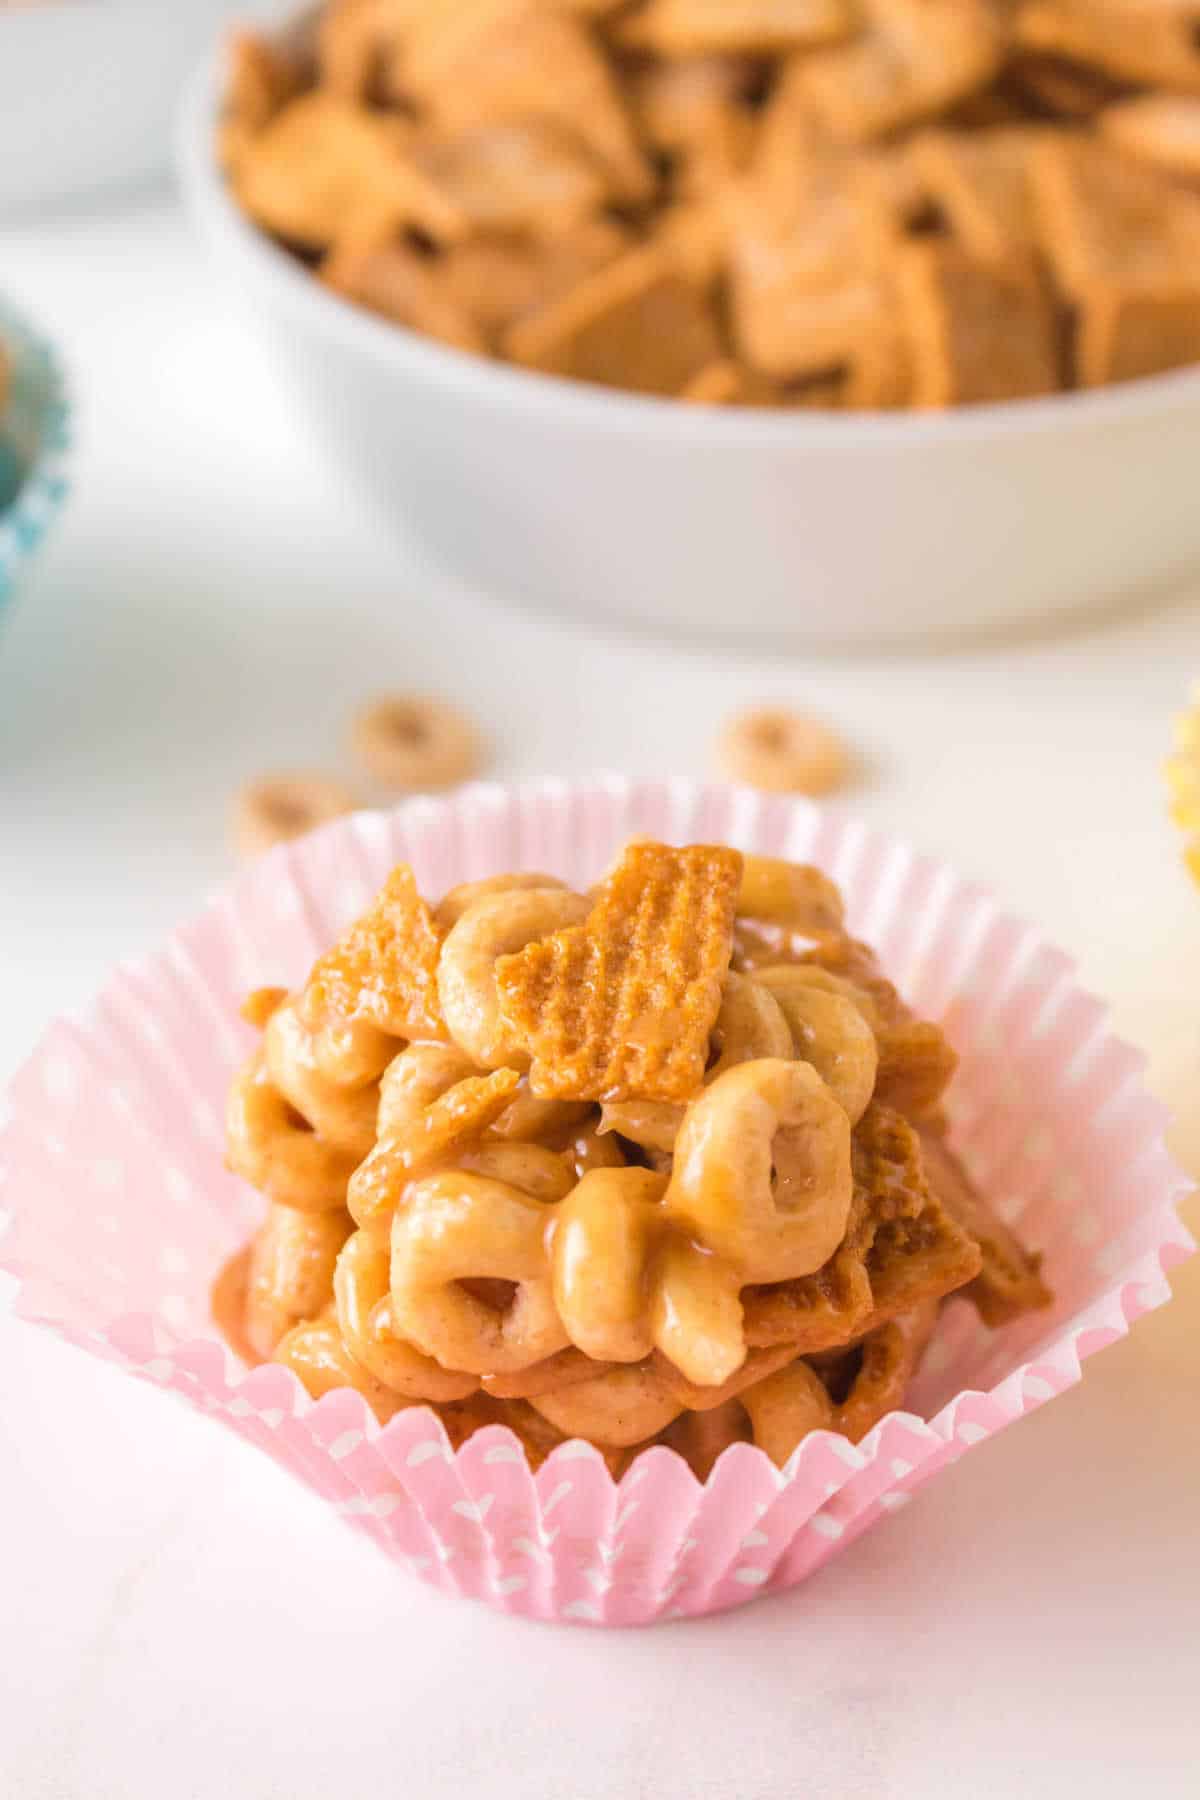 Peanut butter Cheerios Ball in a pink cupcake liner.